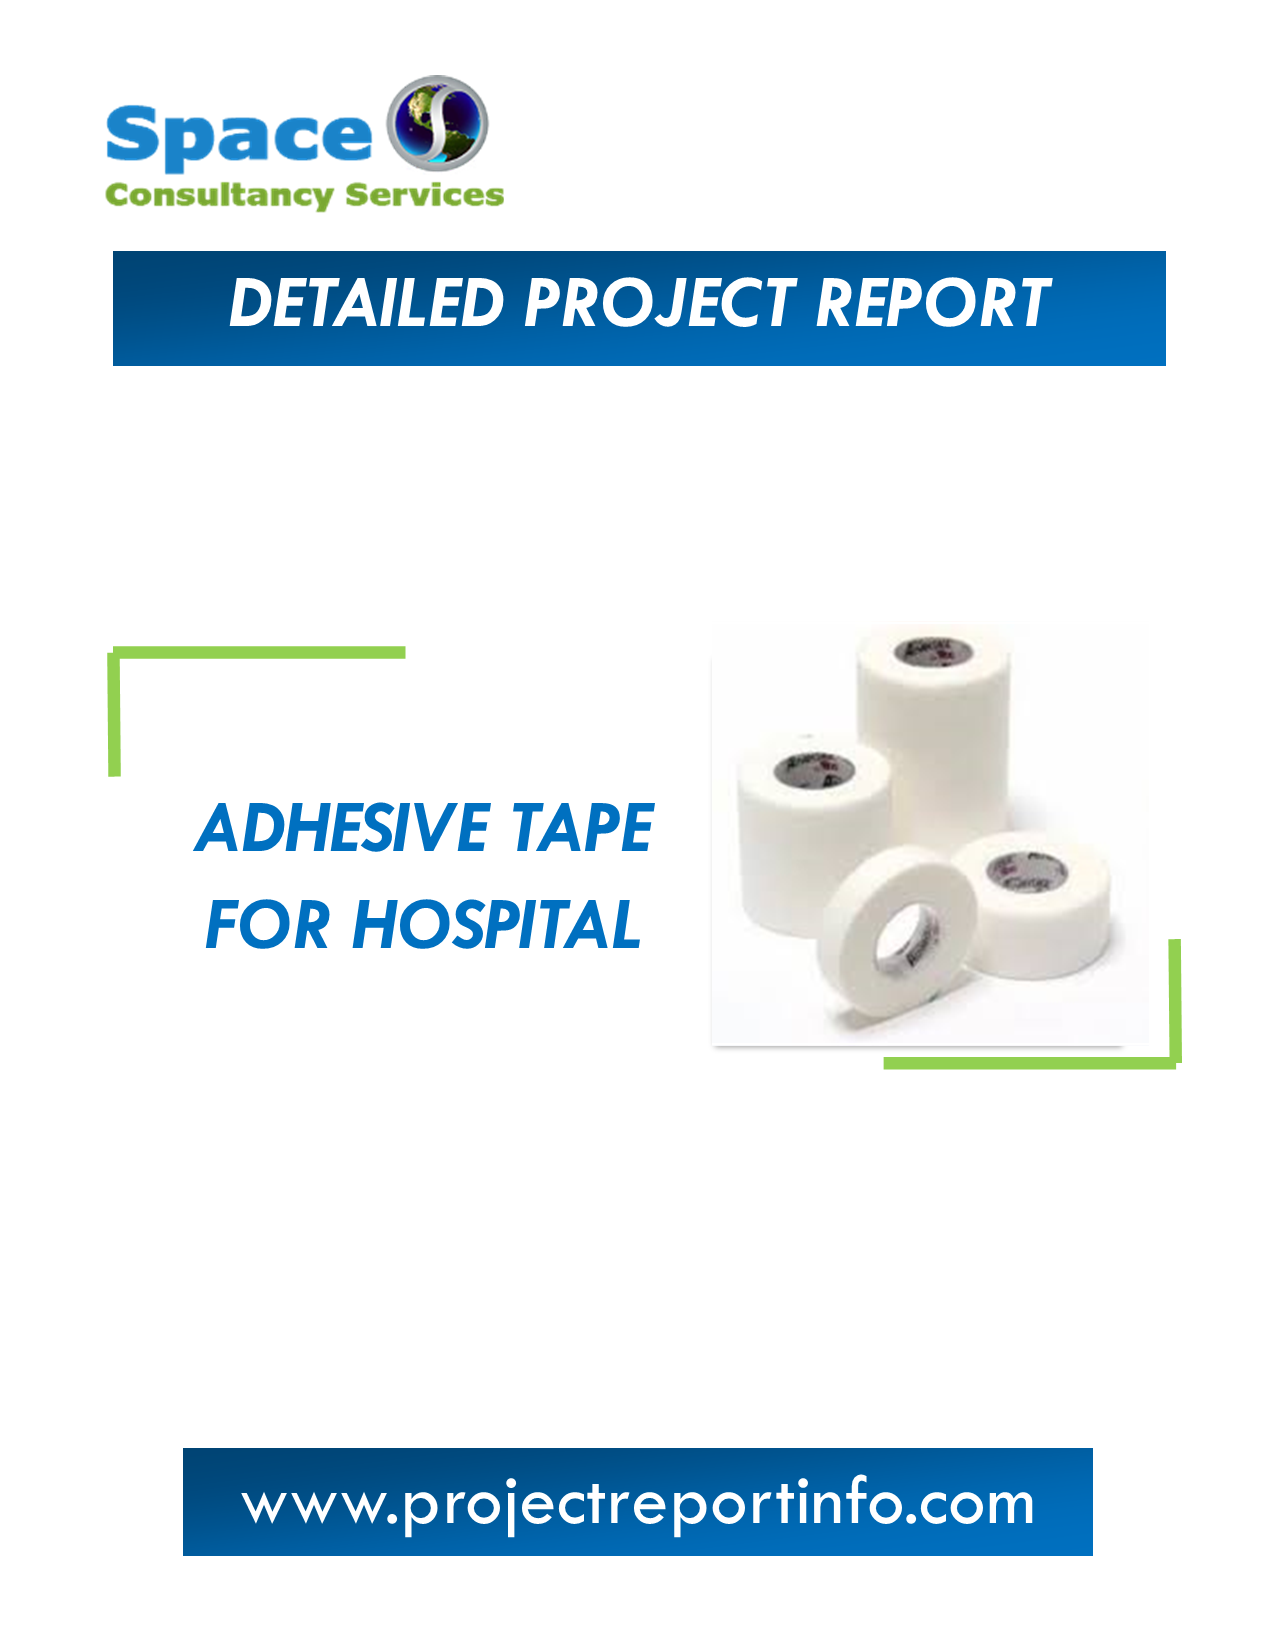 Project Report on Adhesive Tape for Hospital Manufacturing